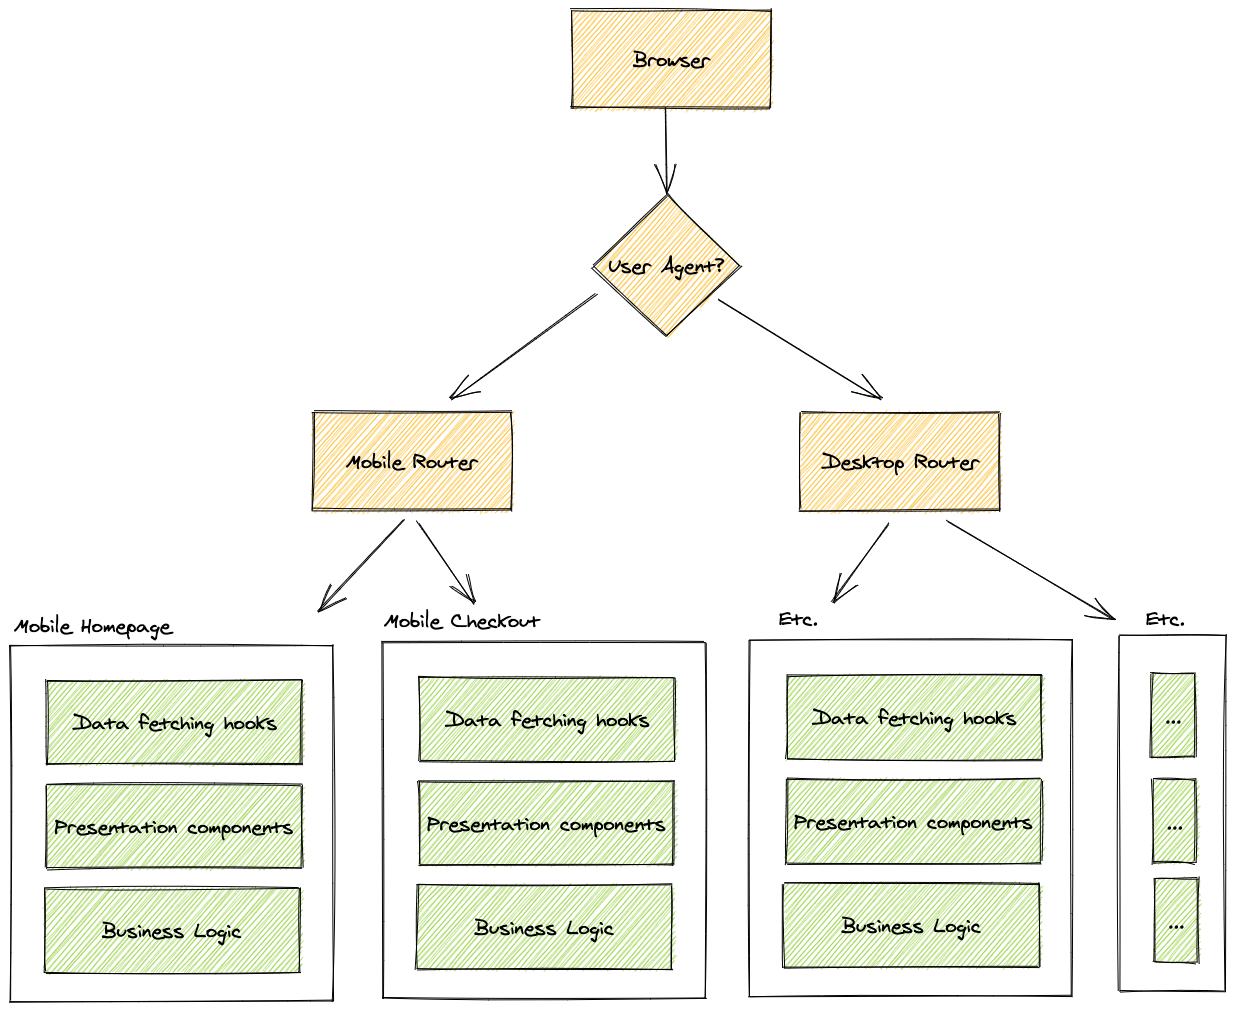 Figure 2. The UberEats.com backend sends different bundles to users based on the user-agent header and page being accessed. We use a split entry point, where mobile and desktop devices receive entirely different top-level components. Bundle splitting within these components lets us isolate different features or pages as well as their respective data fetching and presentational needs.